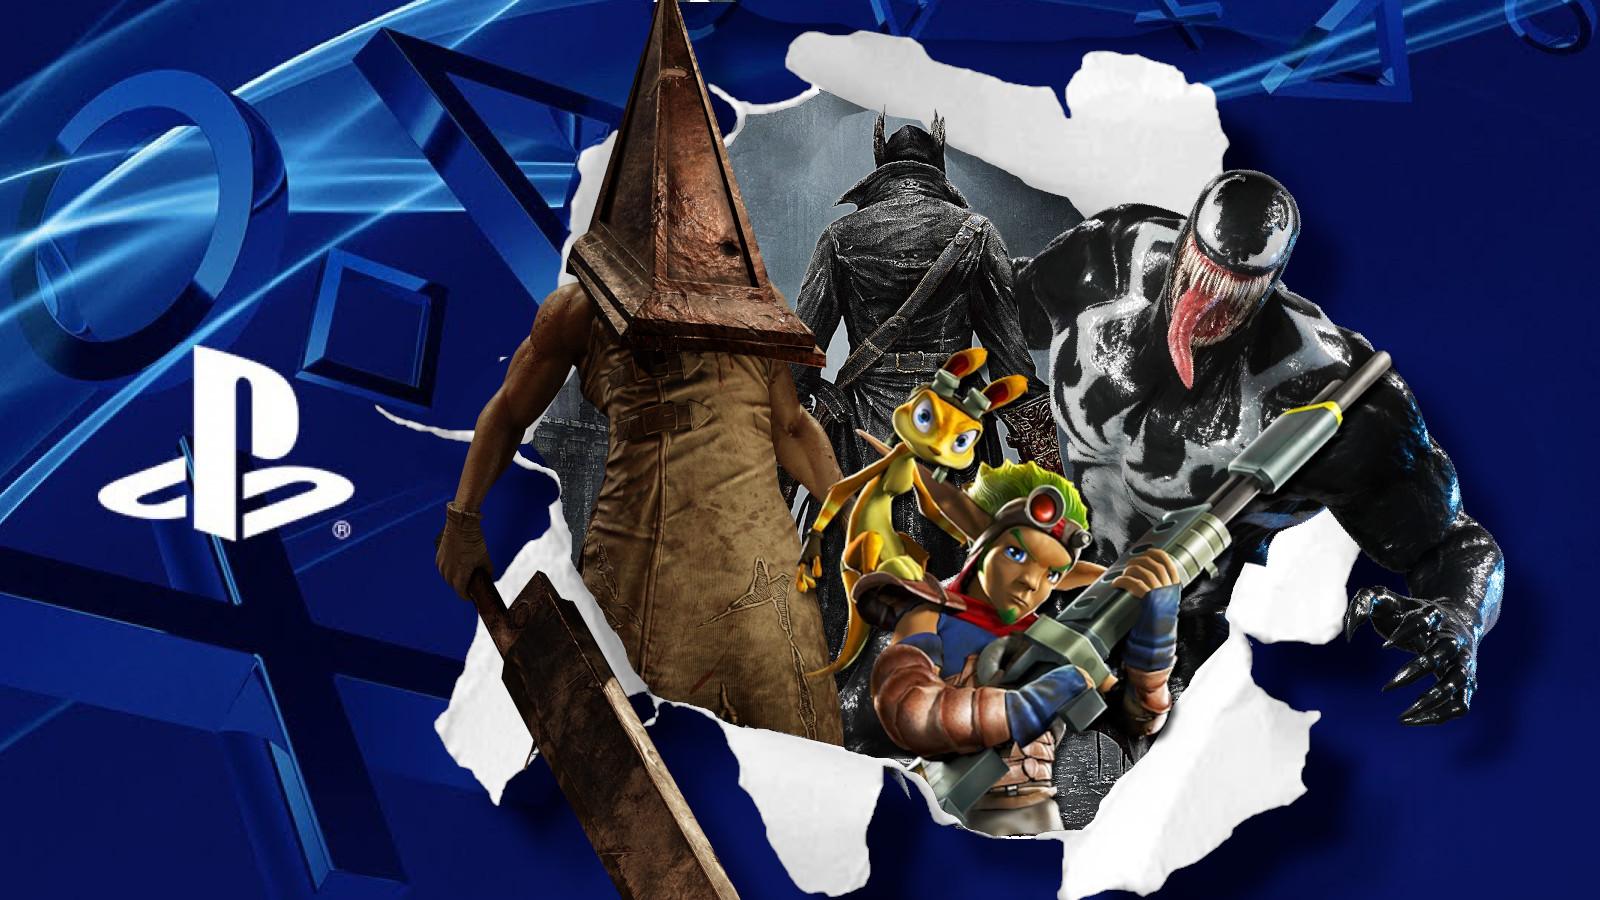 Pyramidhead, Jack and Daxter, Venom, and a Hunet from Bloodborne lead out State of Play predictions